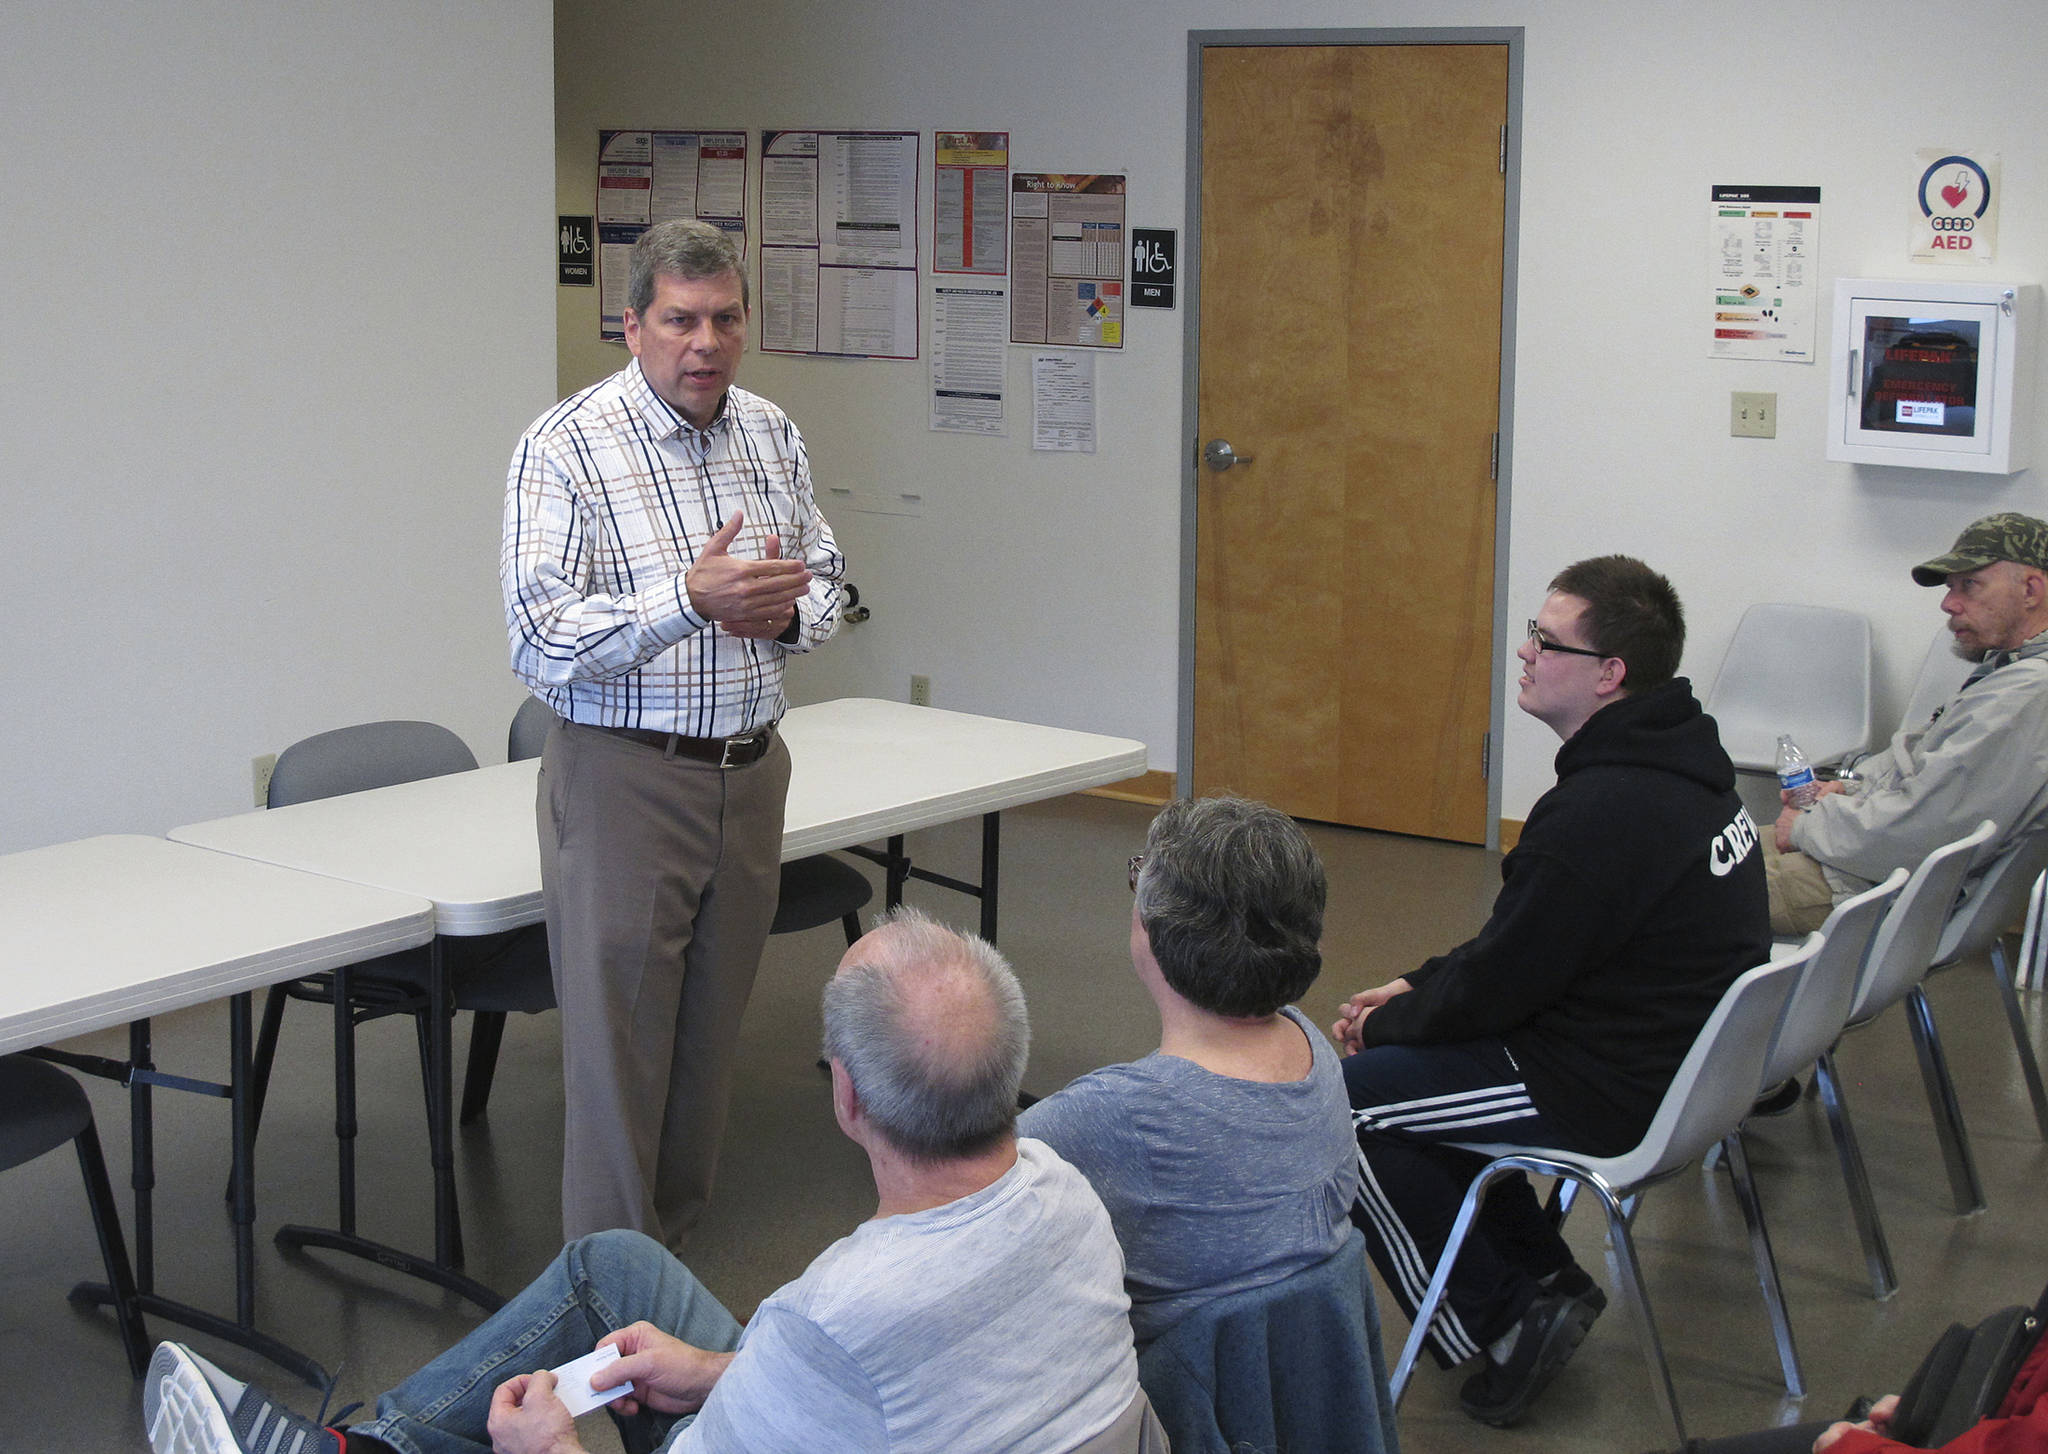 In this June 28, 2018, photo, Democrat Mark Begich, a candidate for governor in Alaska and a former U.S. senator, speaks during a meet-and-greet event at a labor hall in Juneau, Alaska. Begich is seeking to ease concerns some have about his entry into the race, saying he would not be running if he did not think he could win. The race is shaping up to be a three-way, general election contest between Begich, independent Gov. Bill Walker and the eventual Republican nominee. (AP Photo/Becky Bohrer)